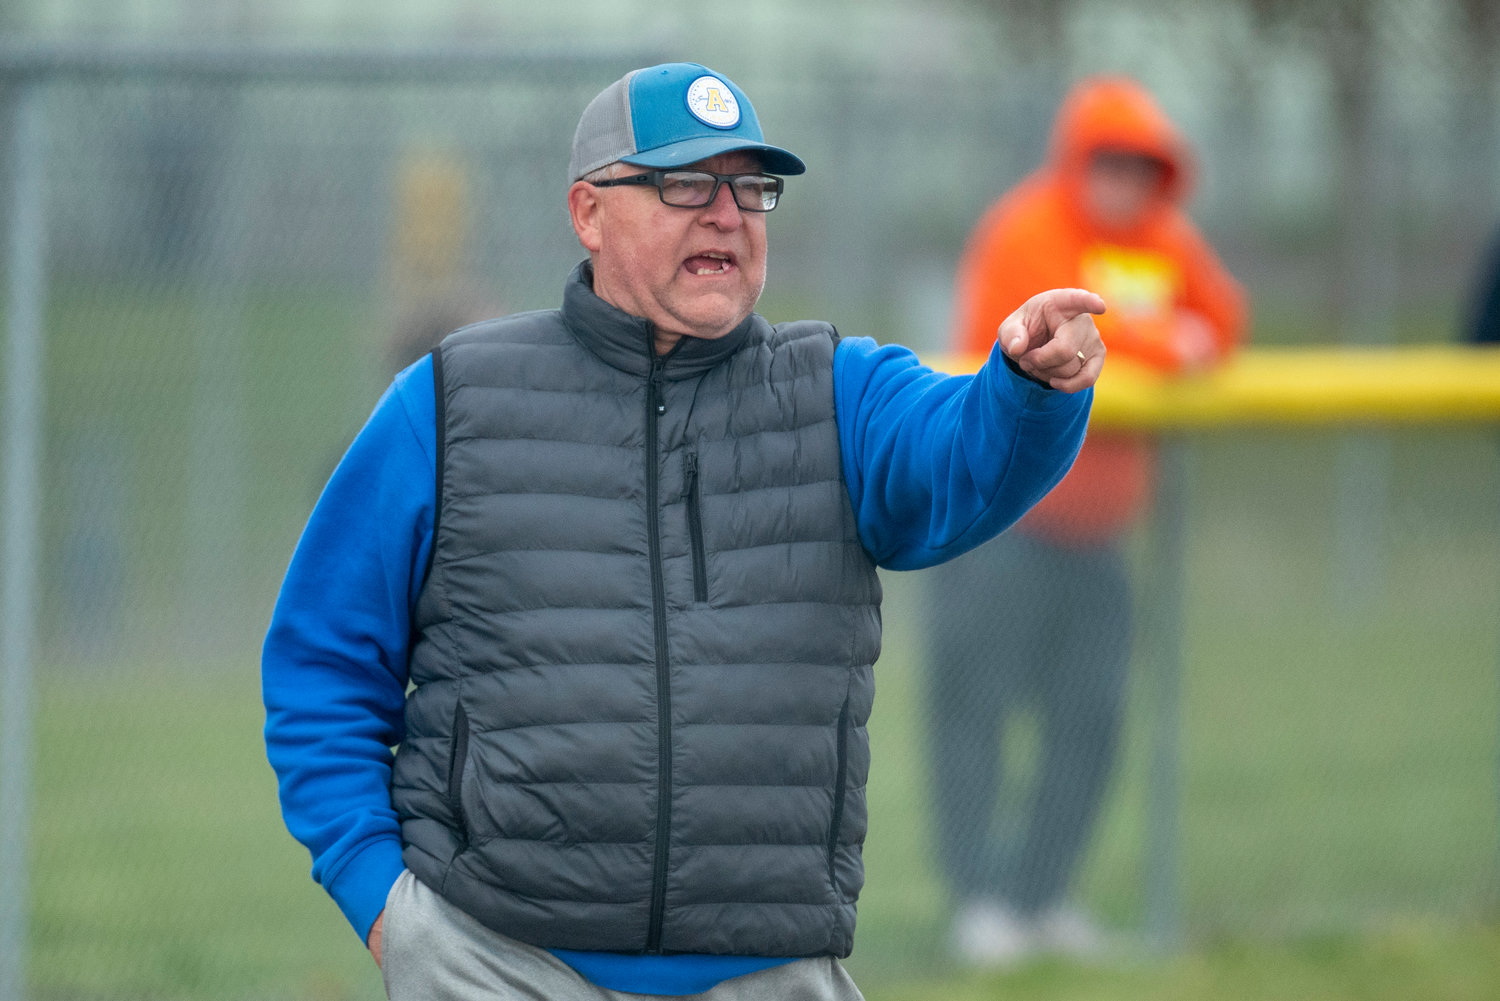 Adna coach Bruce Pocklington calls out instructions to his team during a road game in Winlock on April 20.